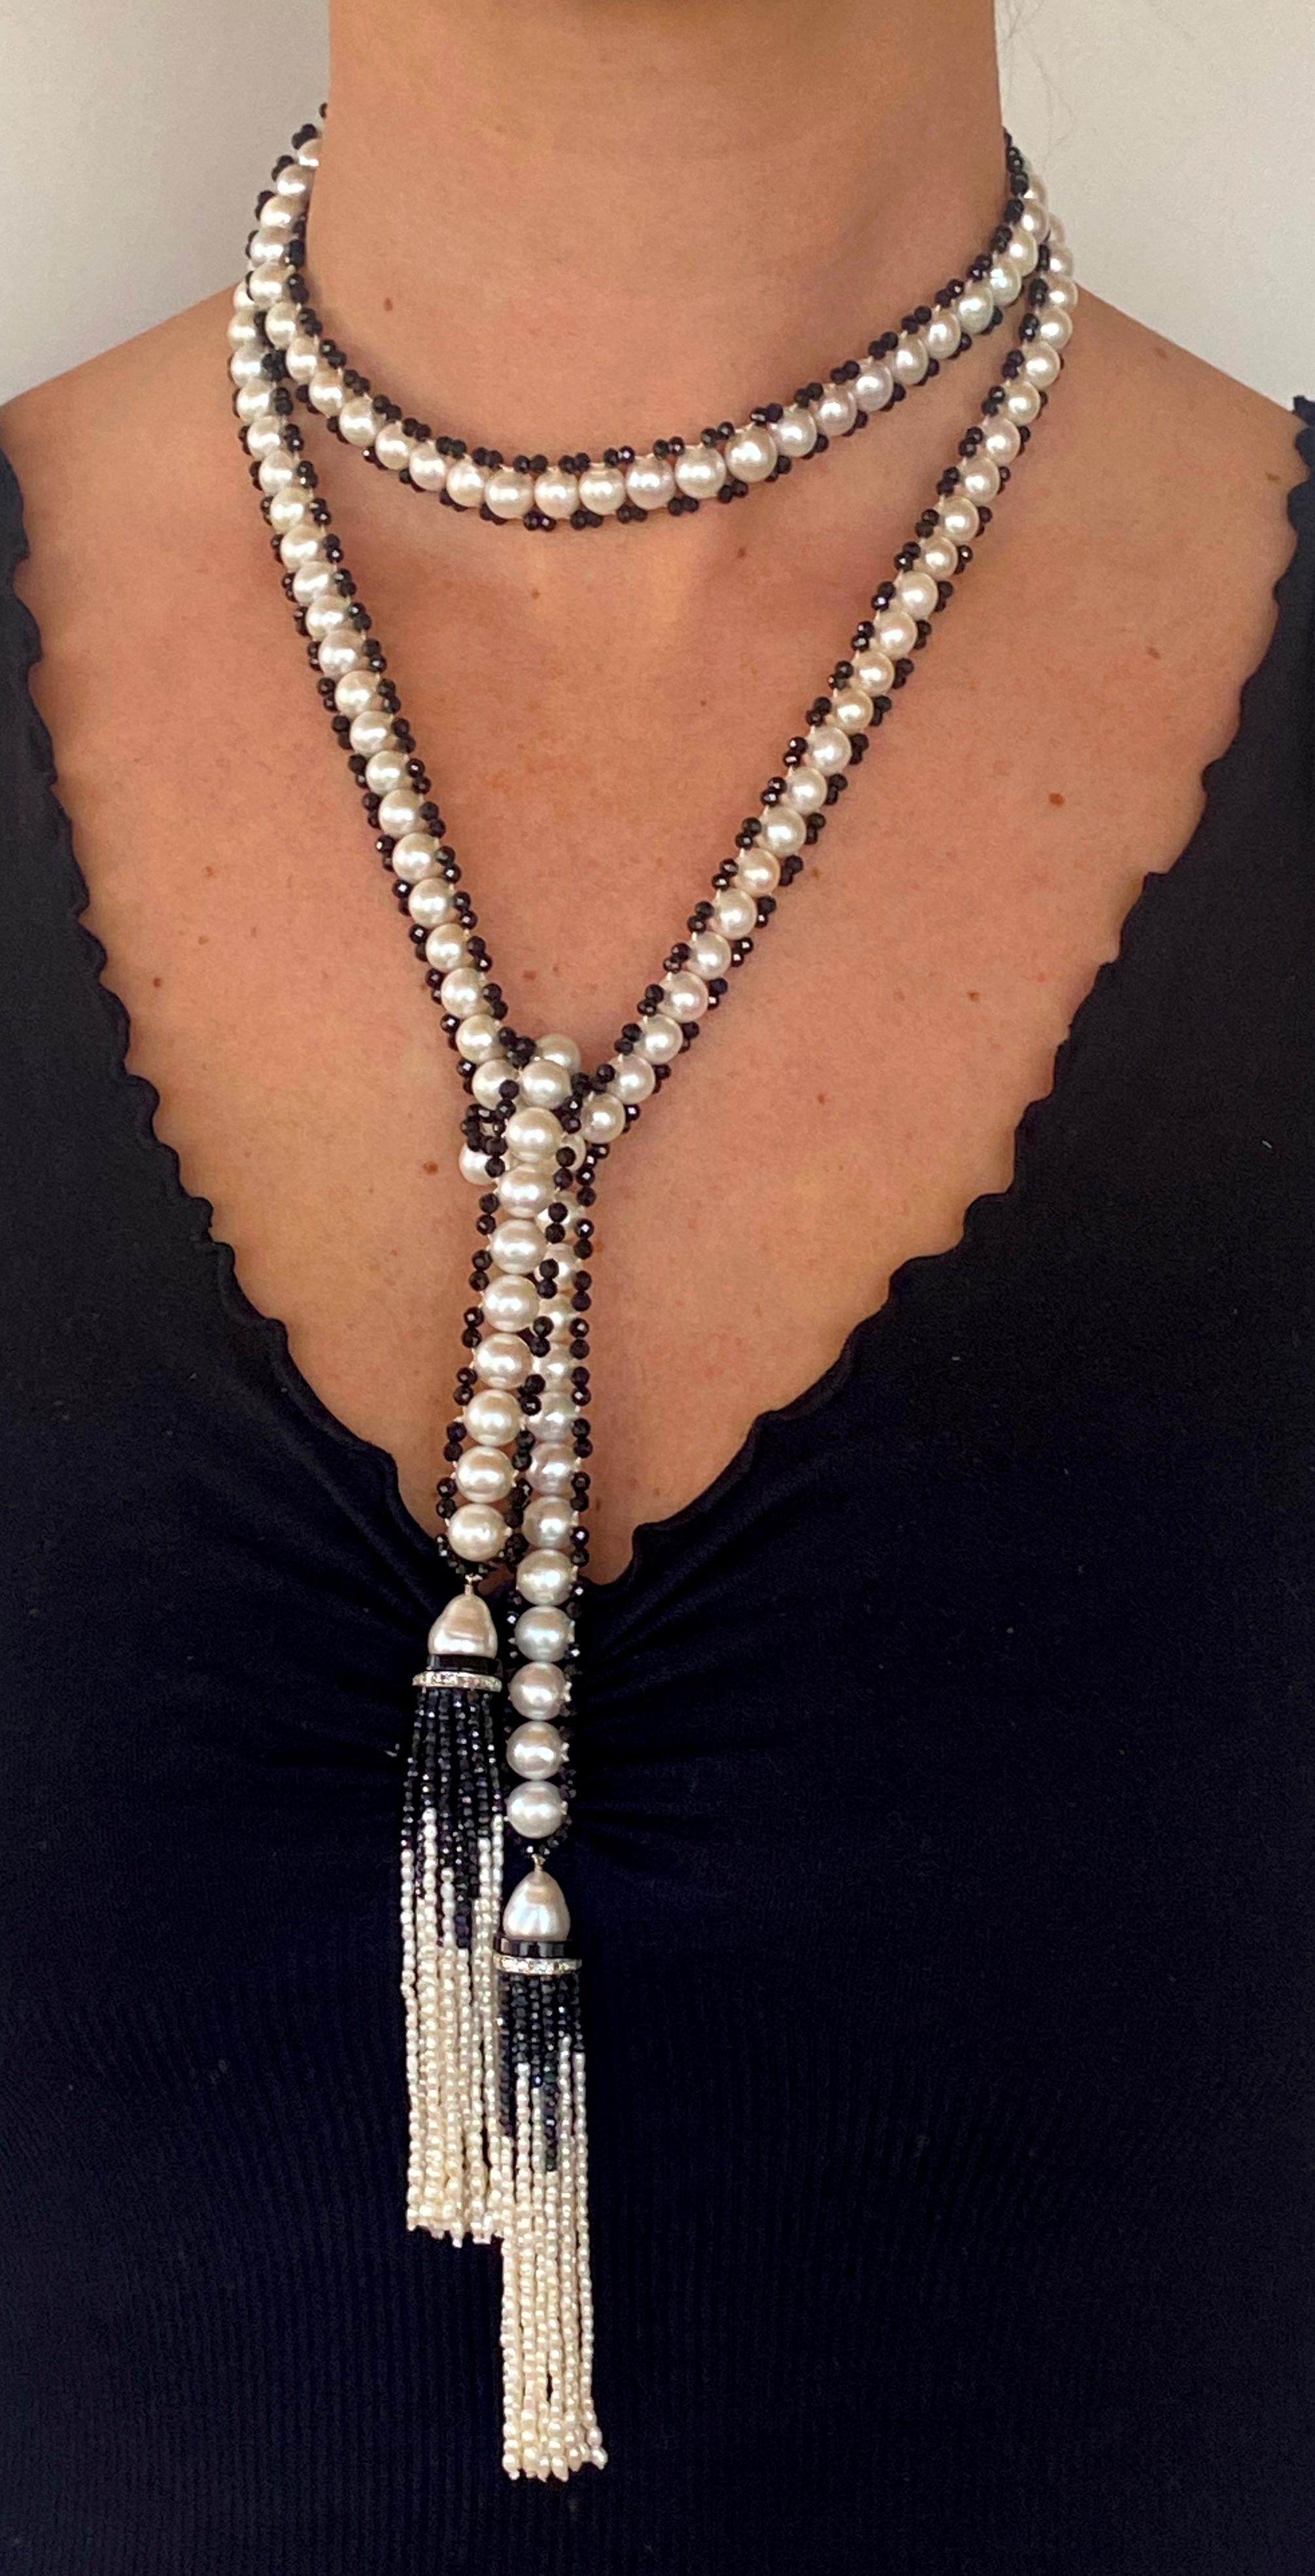 Gorgeous Marina J. hand woven Sautoir. This piece features perfectly round Pearls which display a wild sheen and luster, bordered by smooth Black Onyx beads. Each Pearl was individually chosen giving the Sautoir a perfect and harmonious feel